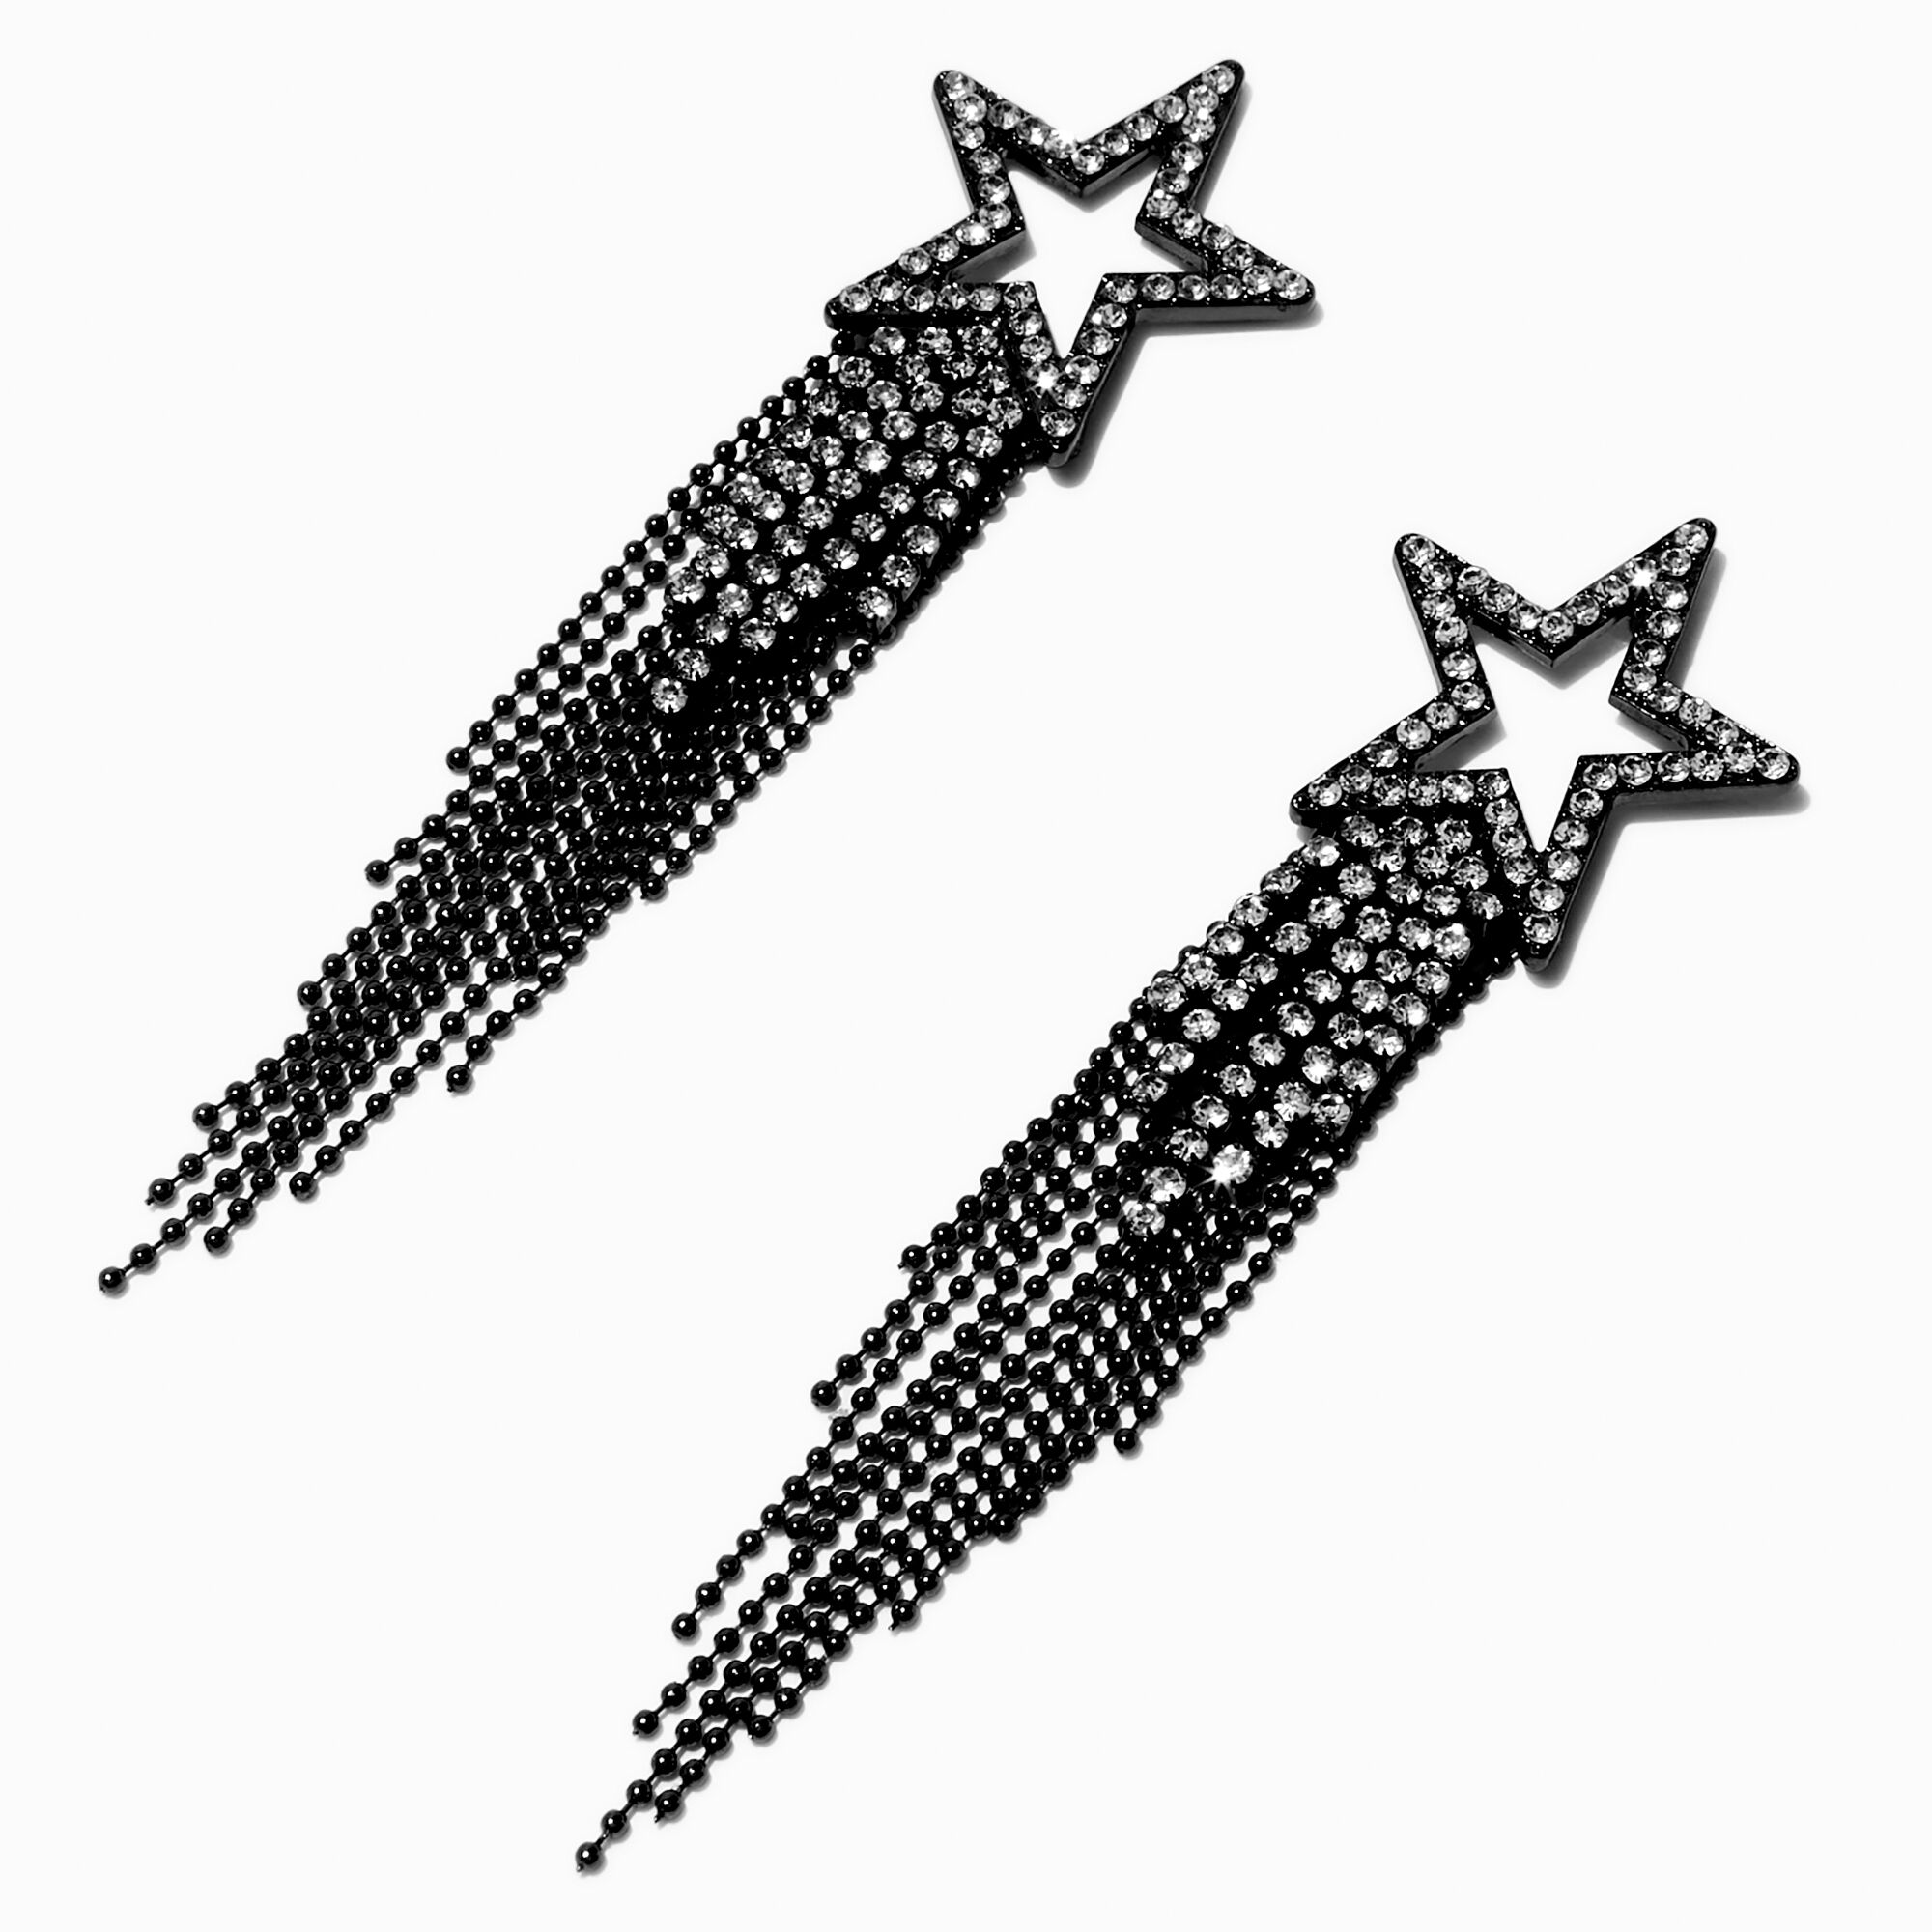 View Claires Crystal Star Fringe 4 Drop Earrings Black information